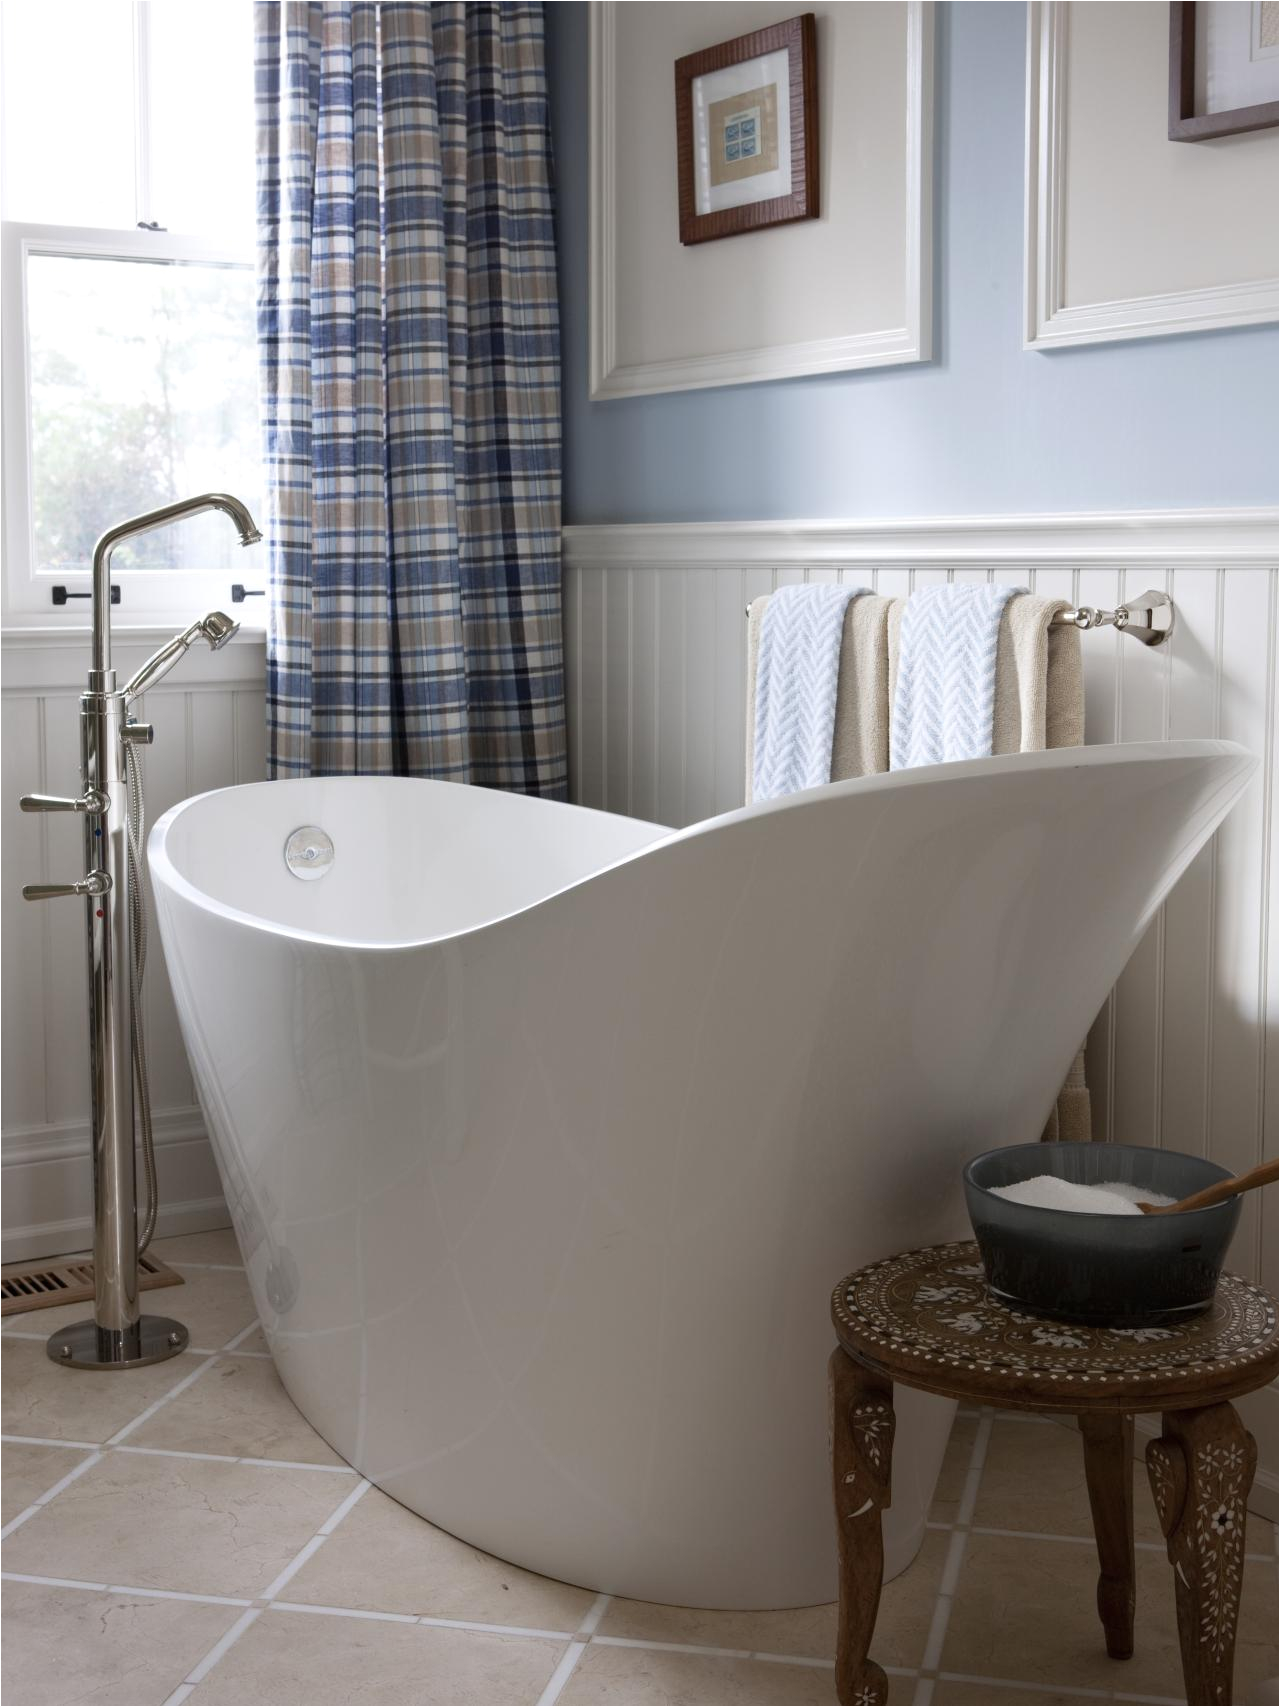 deep bathtubs home depot with contemporary freestanding bathtub with nice with slipper bathtub design